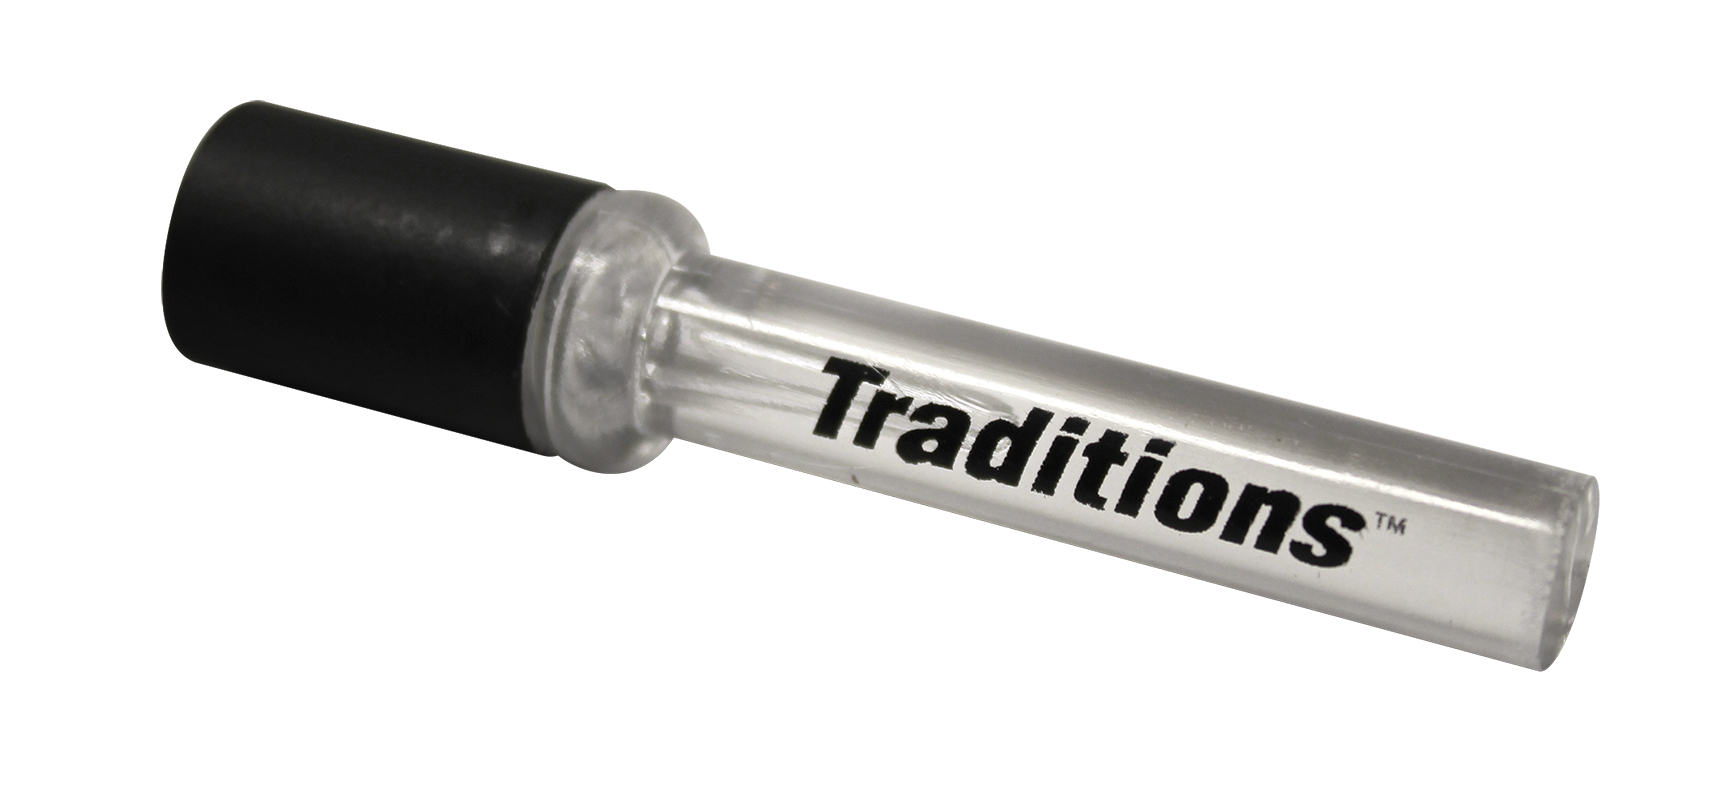 Accessories | Traditions® Performance Firearms